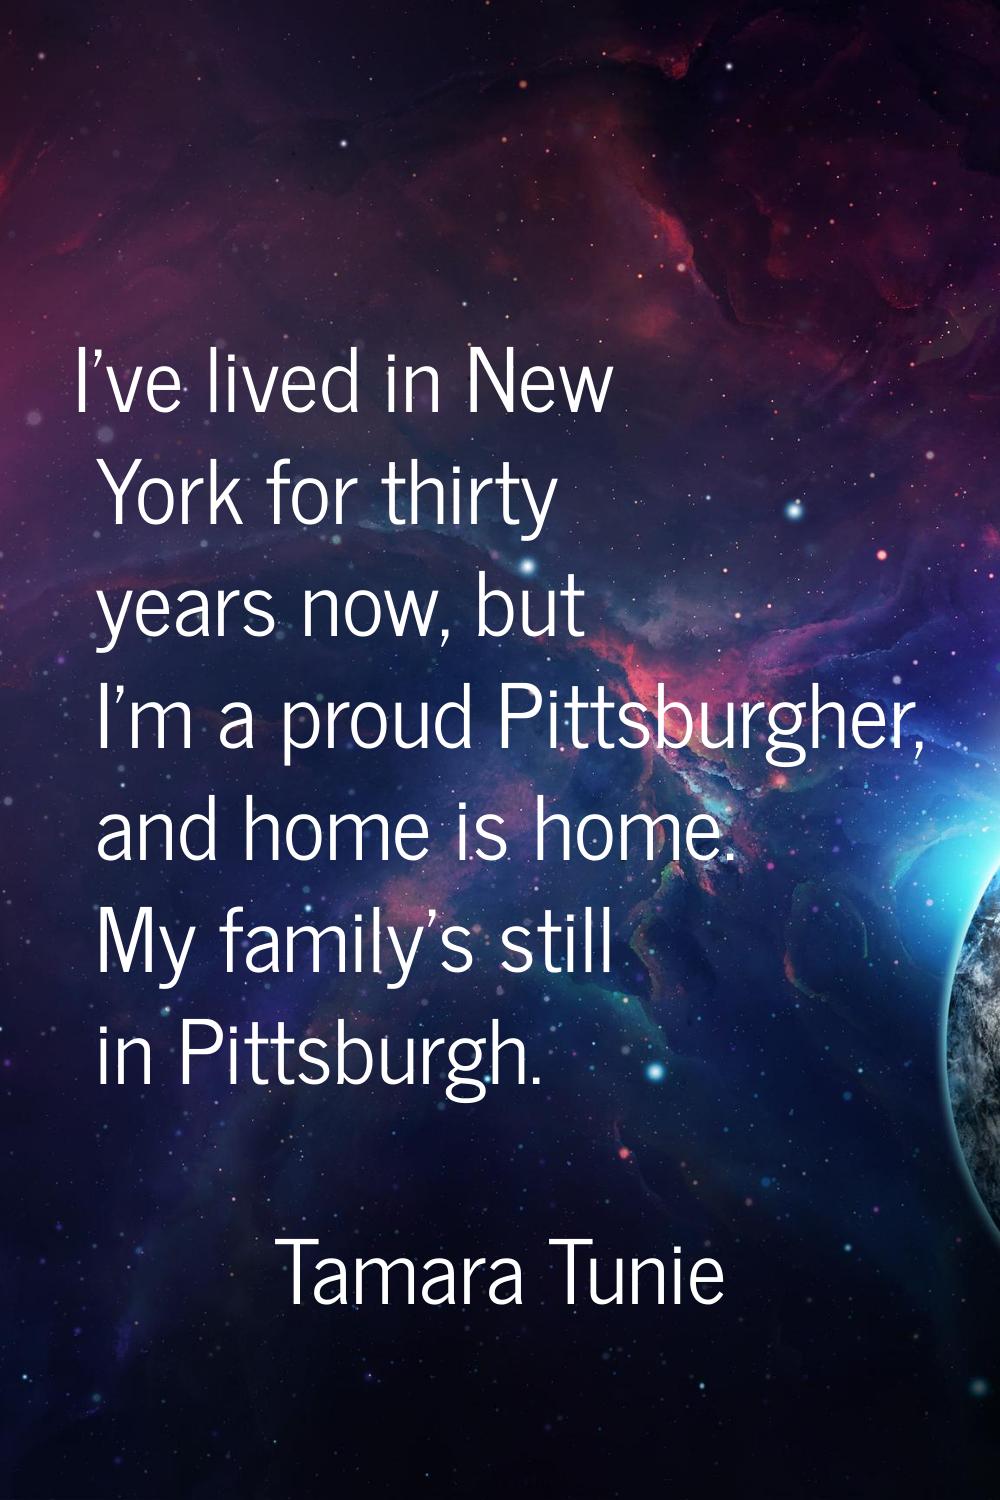 I've lived in New York for thirty years now, but I'm a proud Pittsburgher, and home is home. My fam